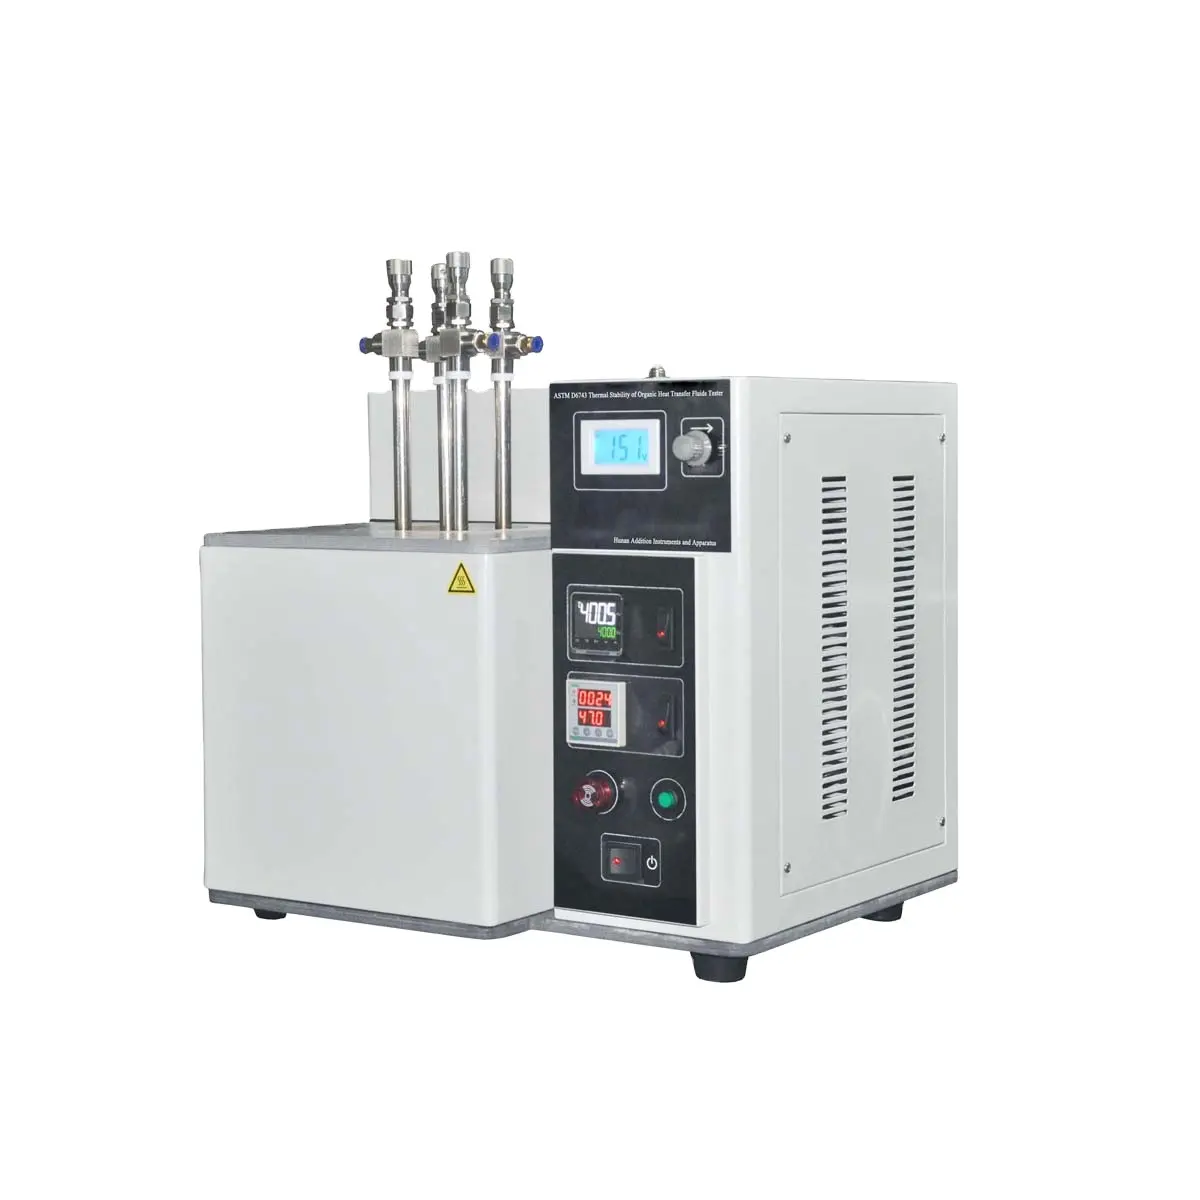 ASTM D6743 Thermal Stability of Organic Heat Transfer Fluids Tester Digital Display Temperature Control Analyzer